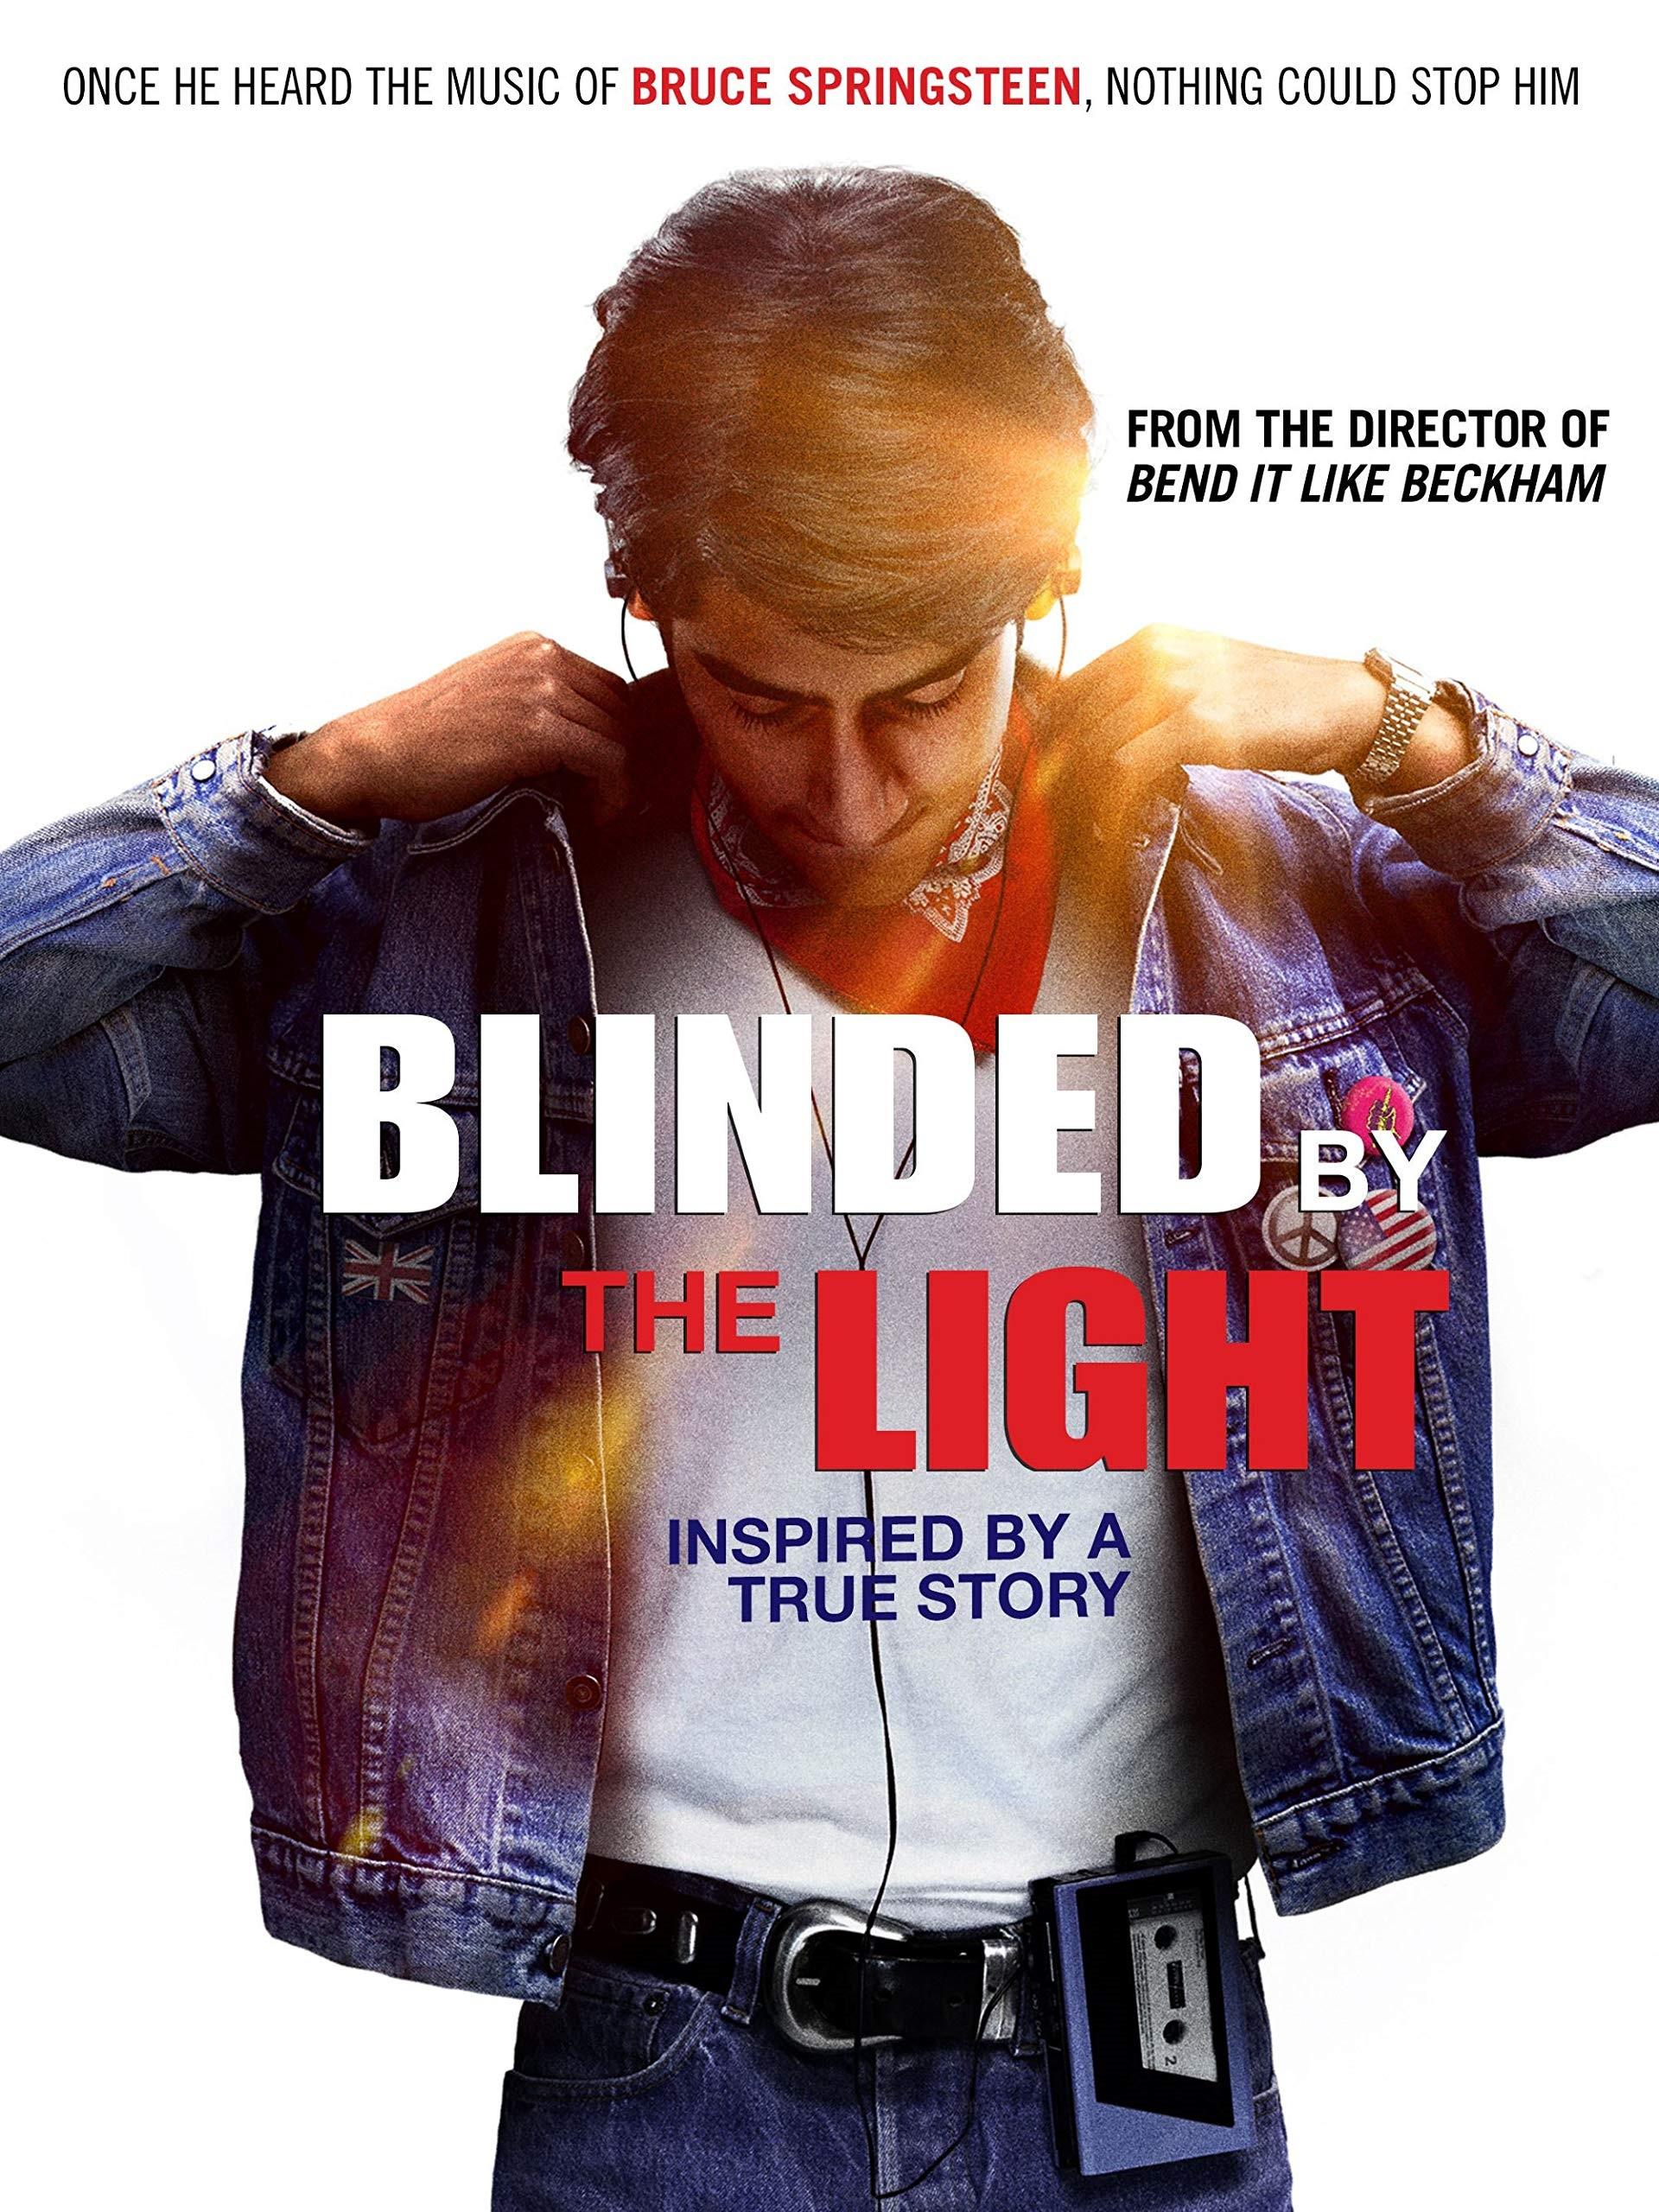 Blinded By the Light (2019) DVD cover